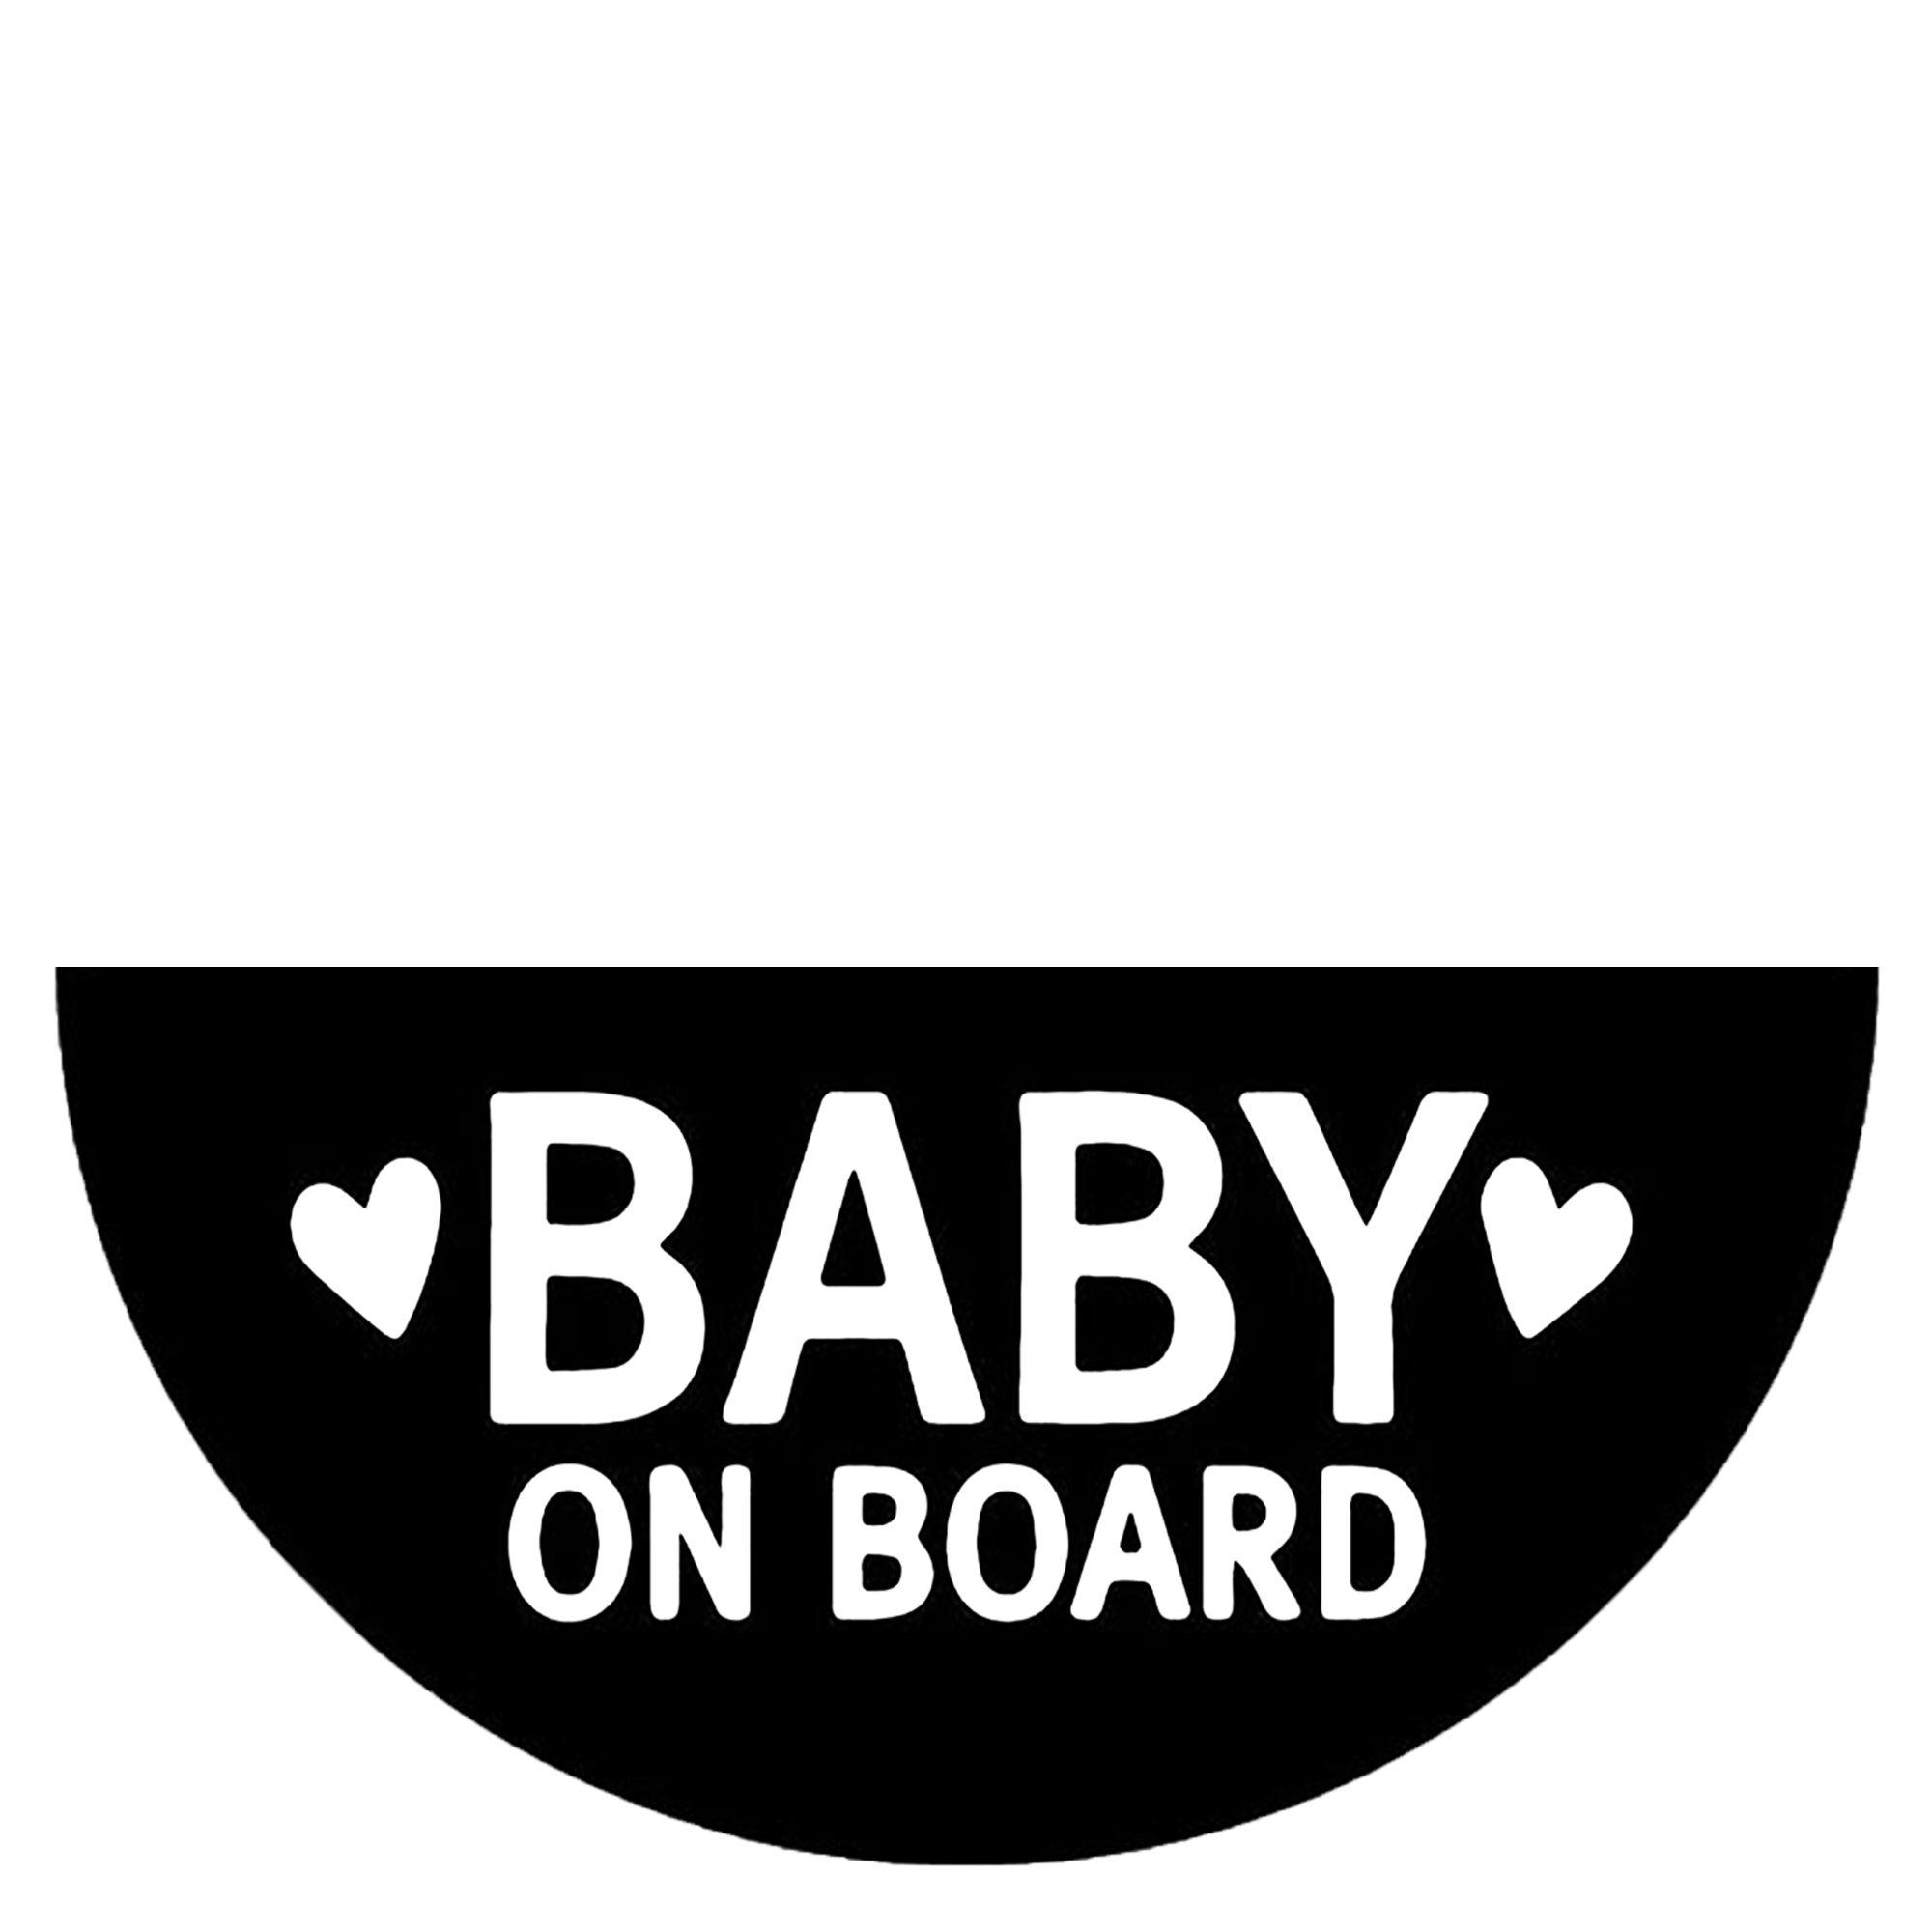 PTN8 Personalised BABY ON BOARD BABY IN CAR Safety Sticker Car Vinyl Stickers Decals Accessories